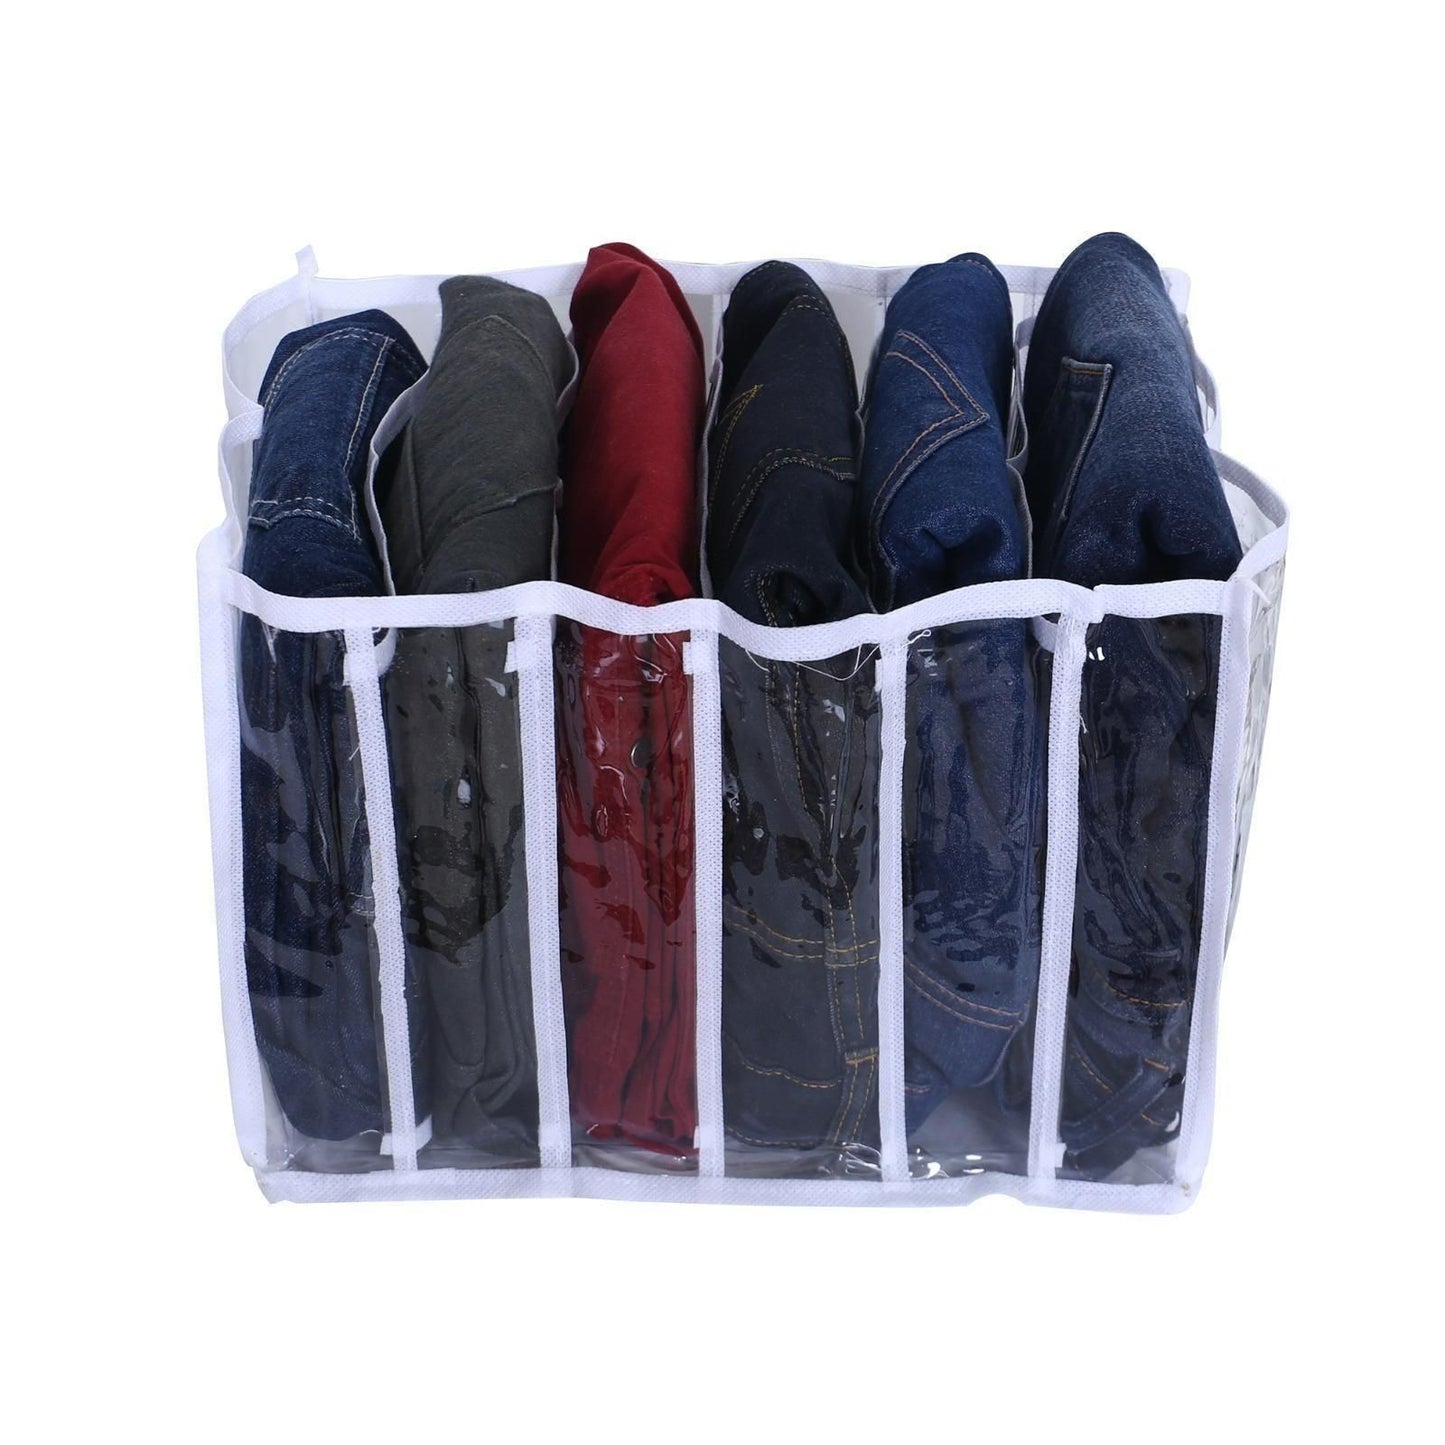 6 Grids Clothes Organizer (Pack of 6)